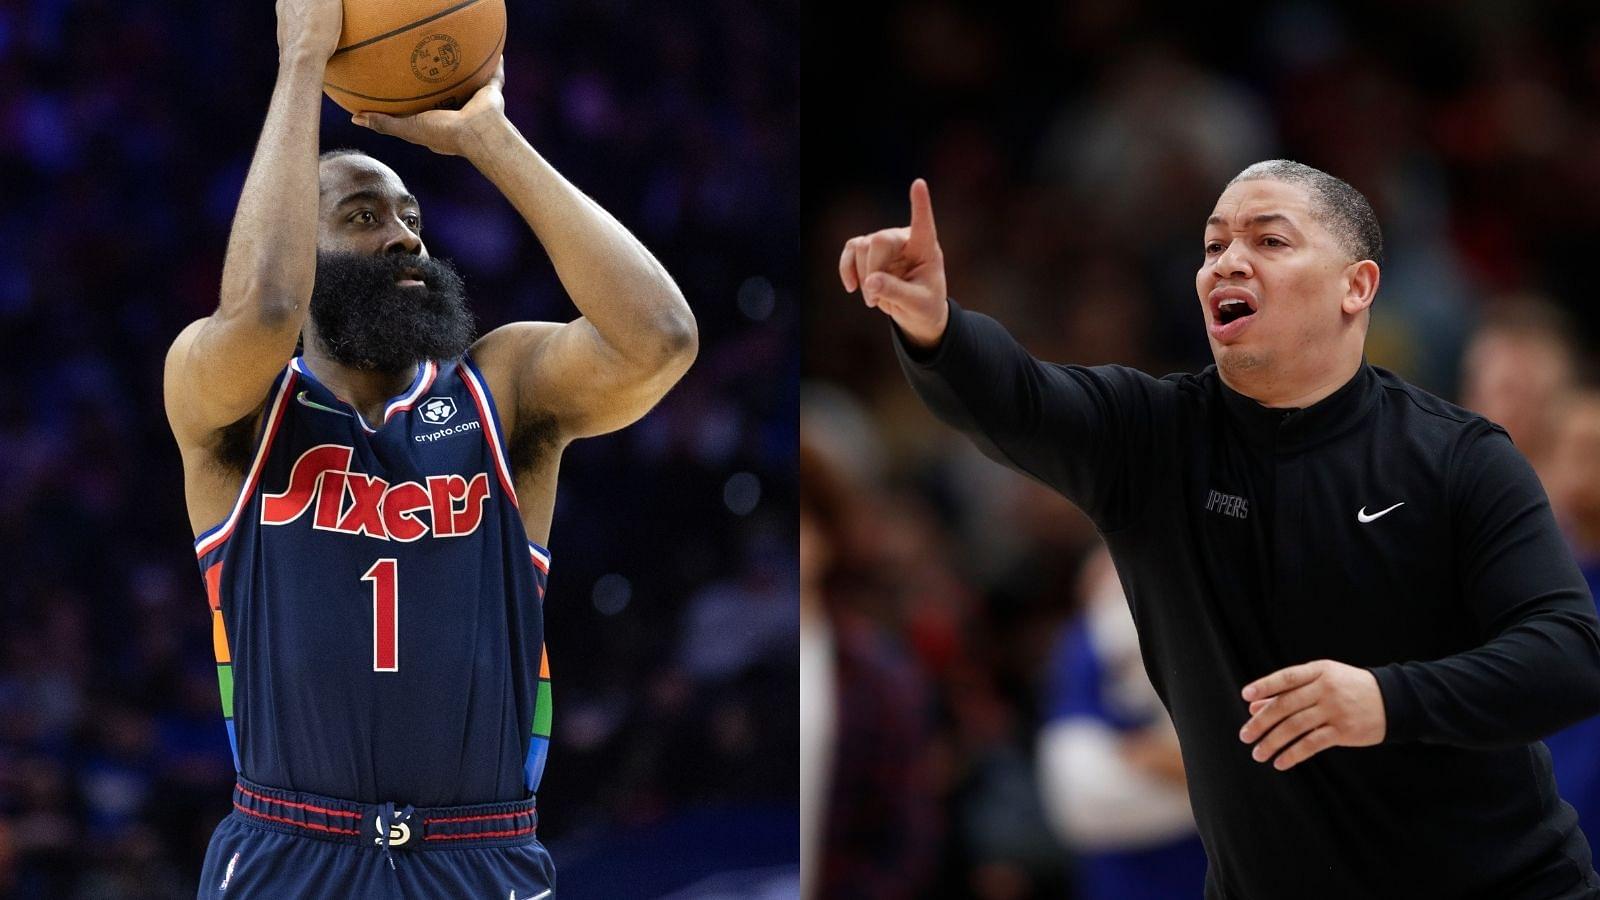 “What if you take away Joel Embiid and Giannis Antetokounmpo's free throws?”: James cannot make sense out of Ty Lue's comment on free throws, claps back at Clippers coach